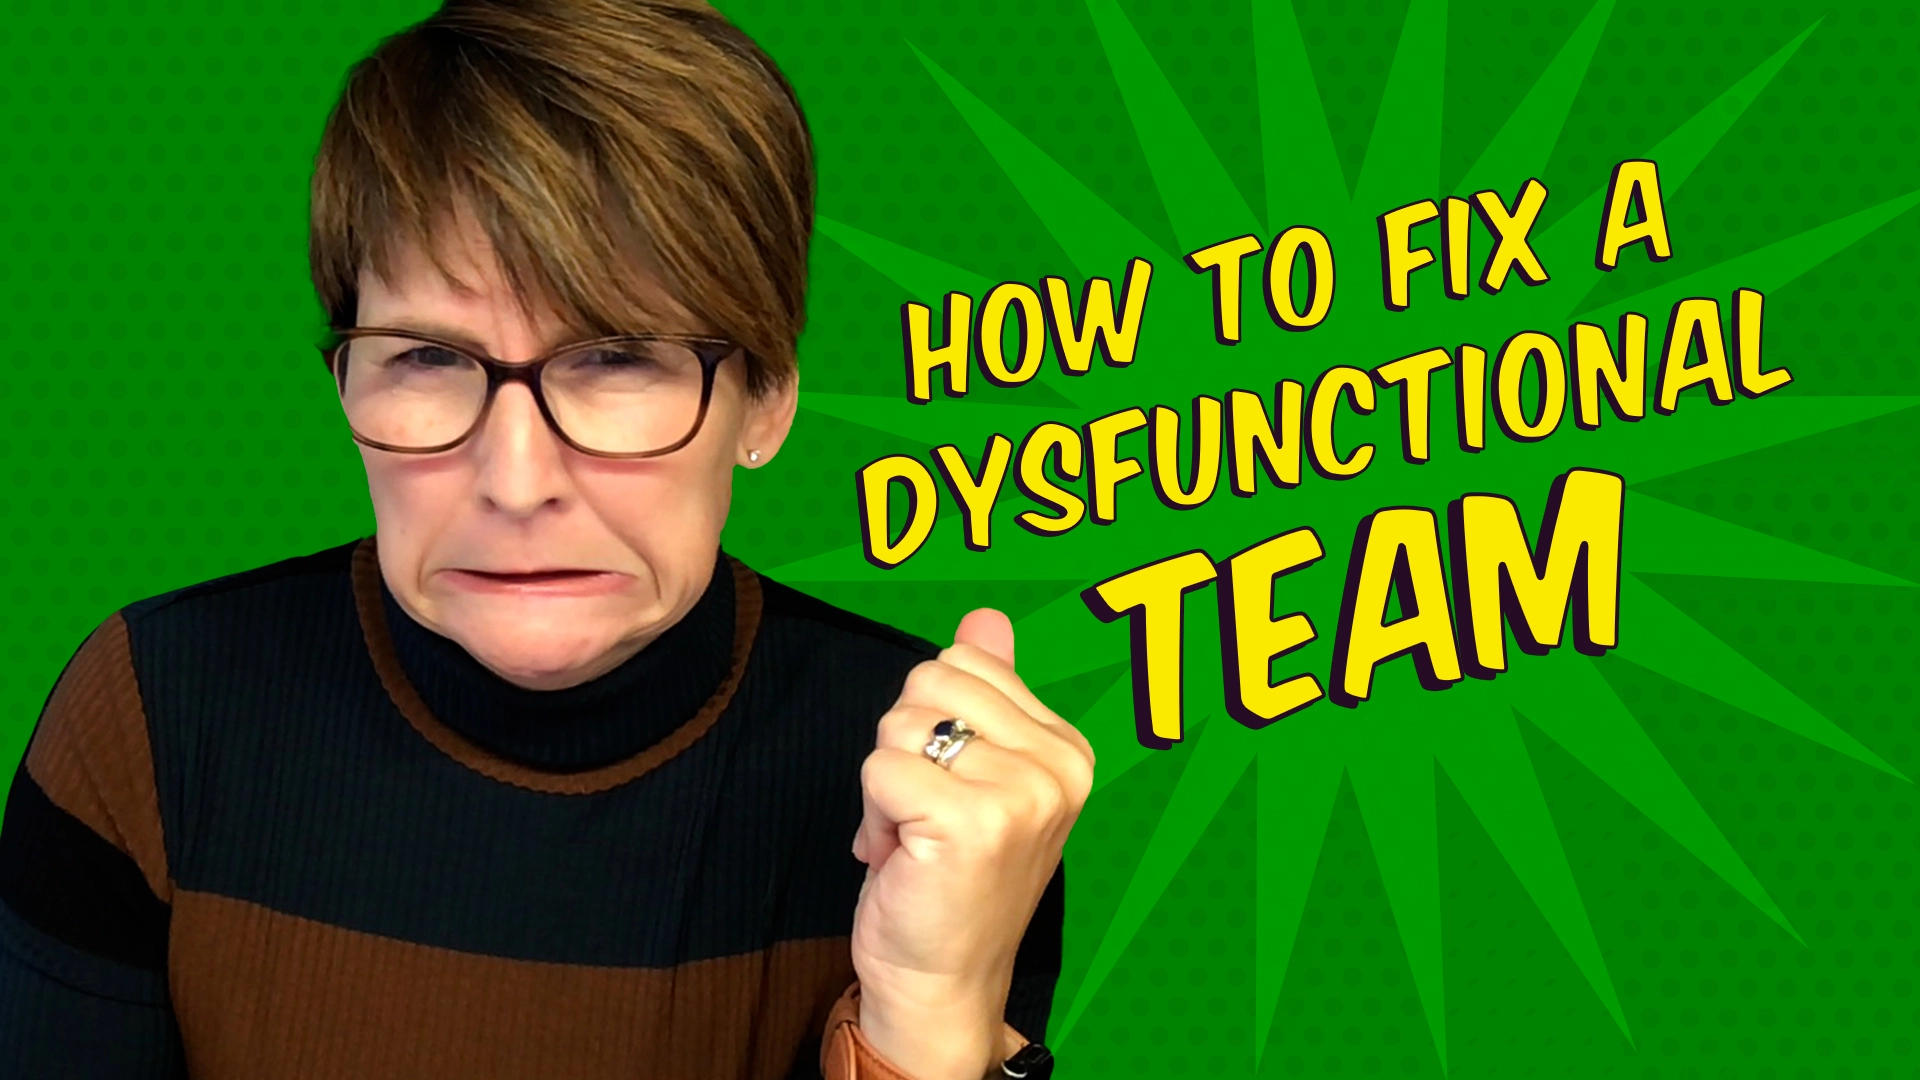 How to Fix a Dysfunctional Team with Liane Davey